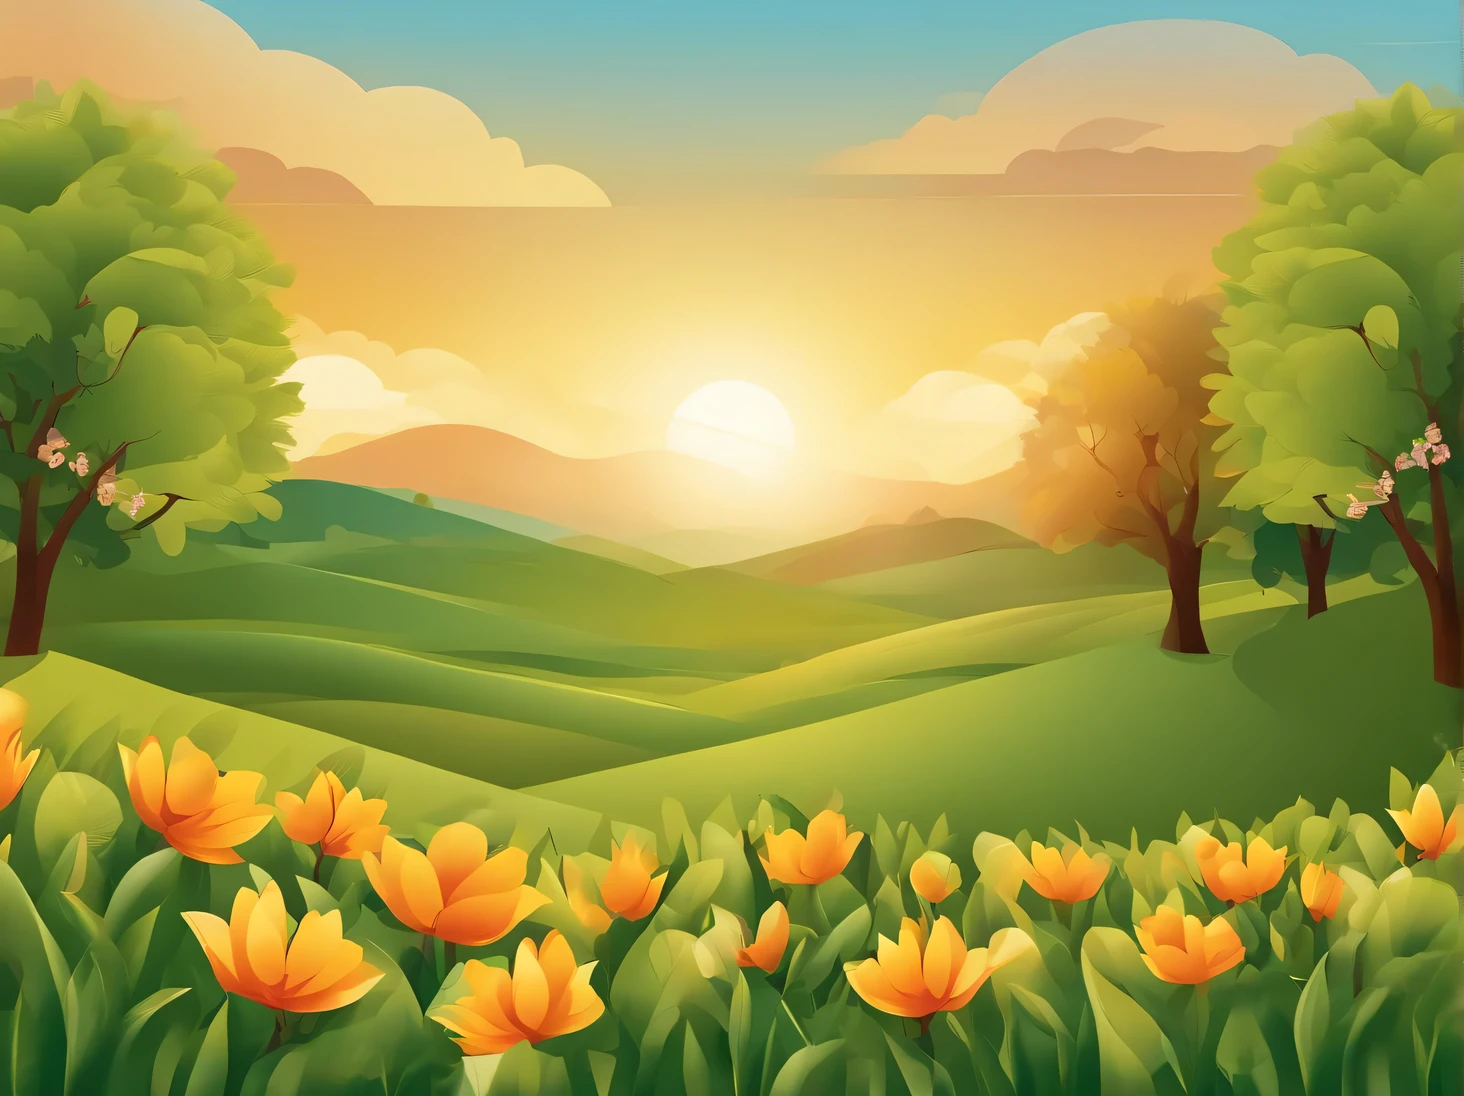 Aesthetics of vector art, spring in vector graphics, warm, sunny, joyful, nature wakes up, vector art, high definition, clear contours, gradients